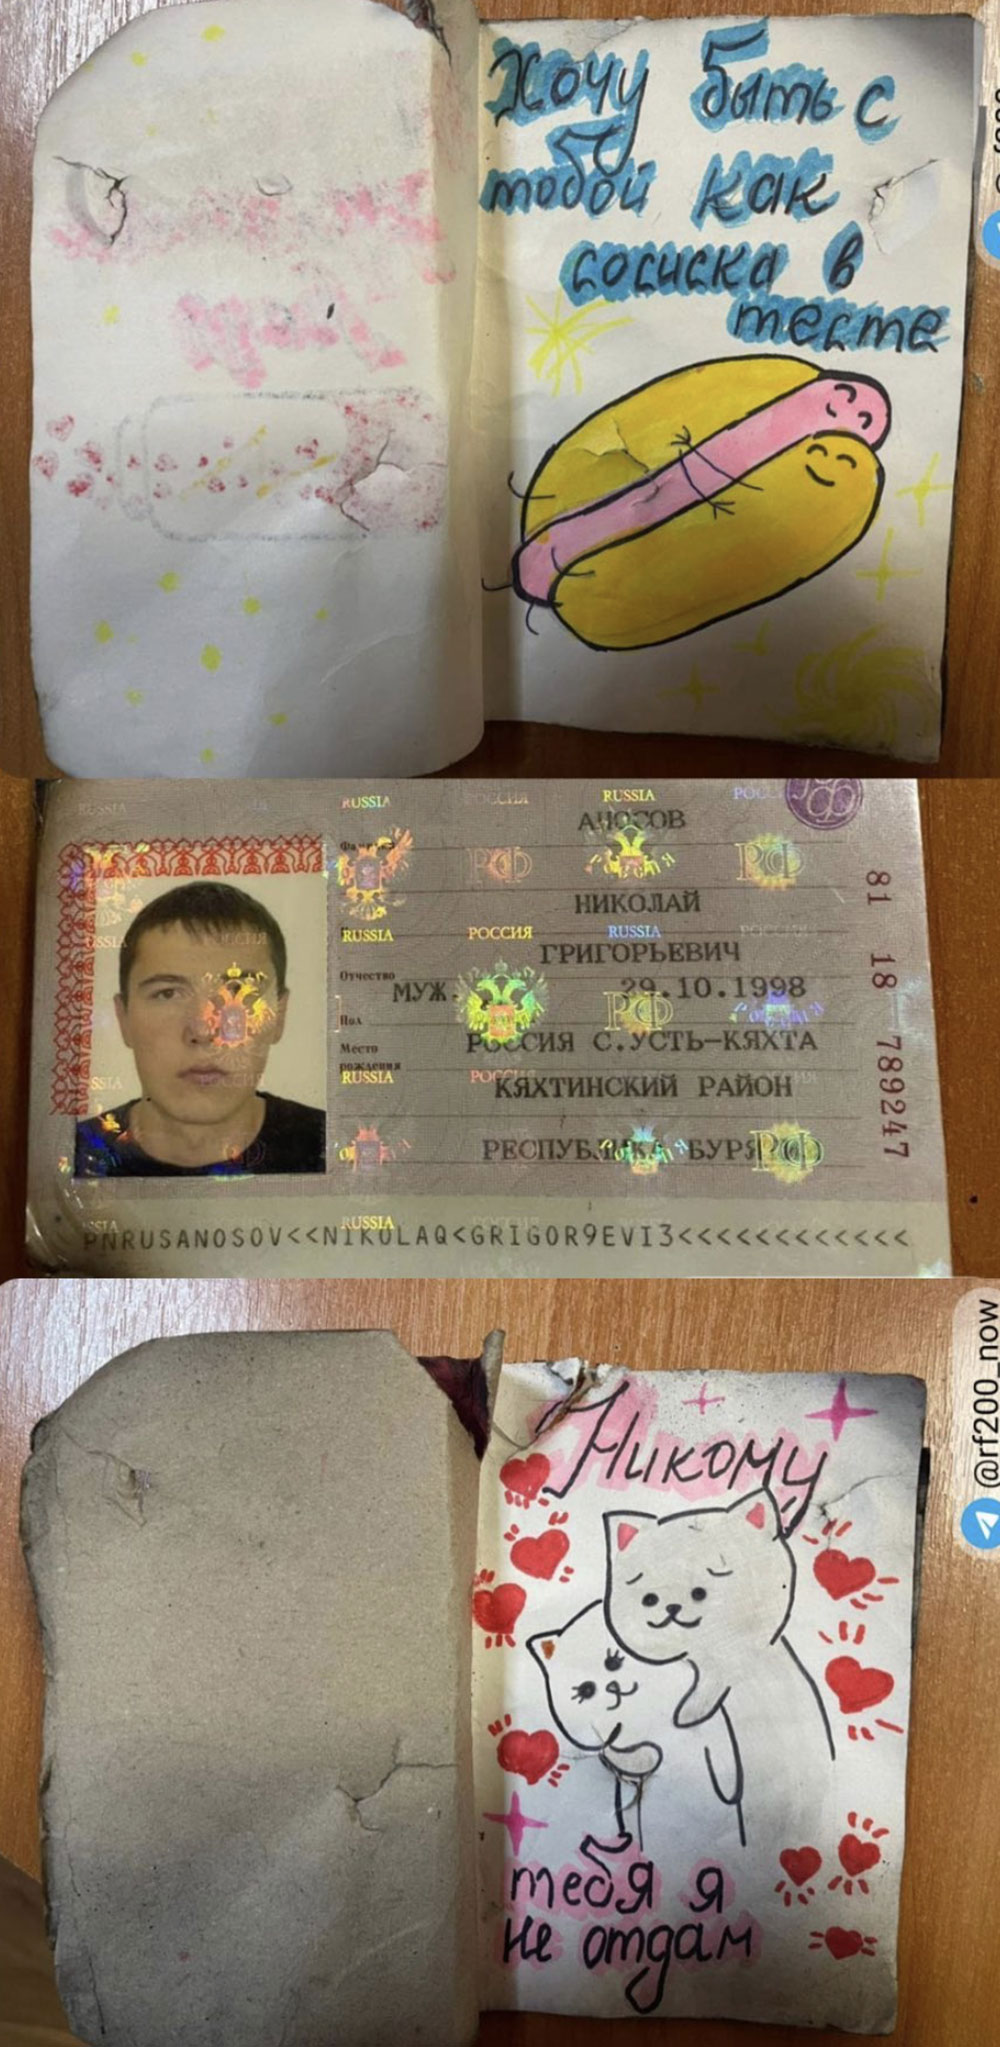 A dead Russian soldiers military I.D with drawings and love letters from his significant other.